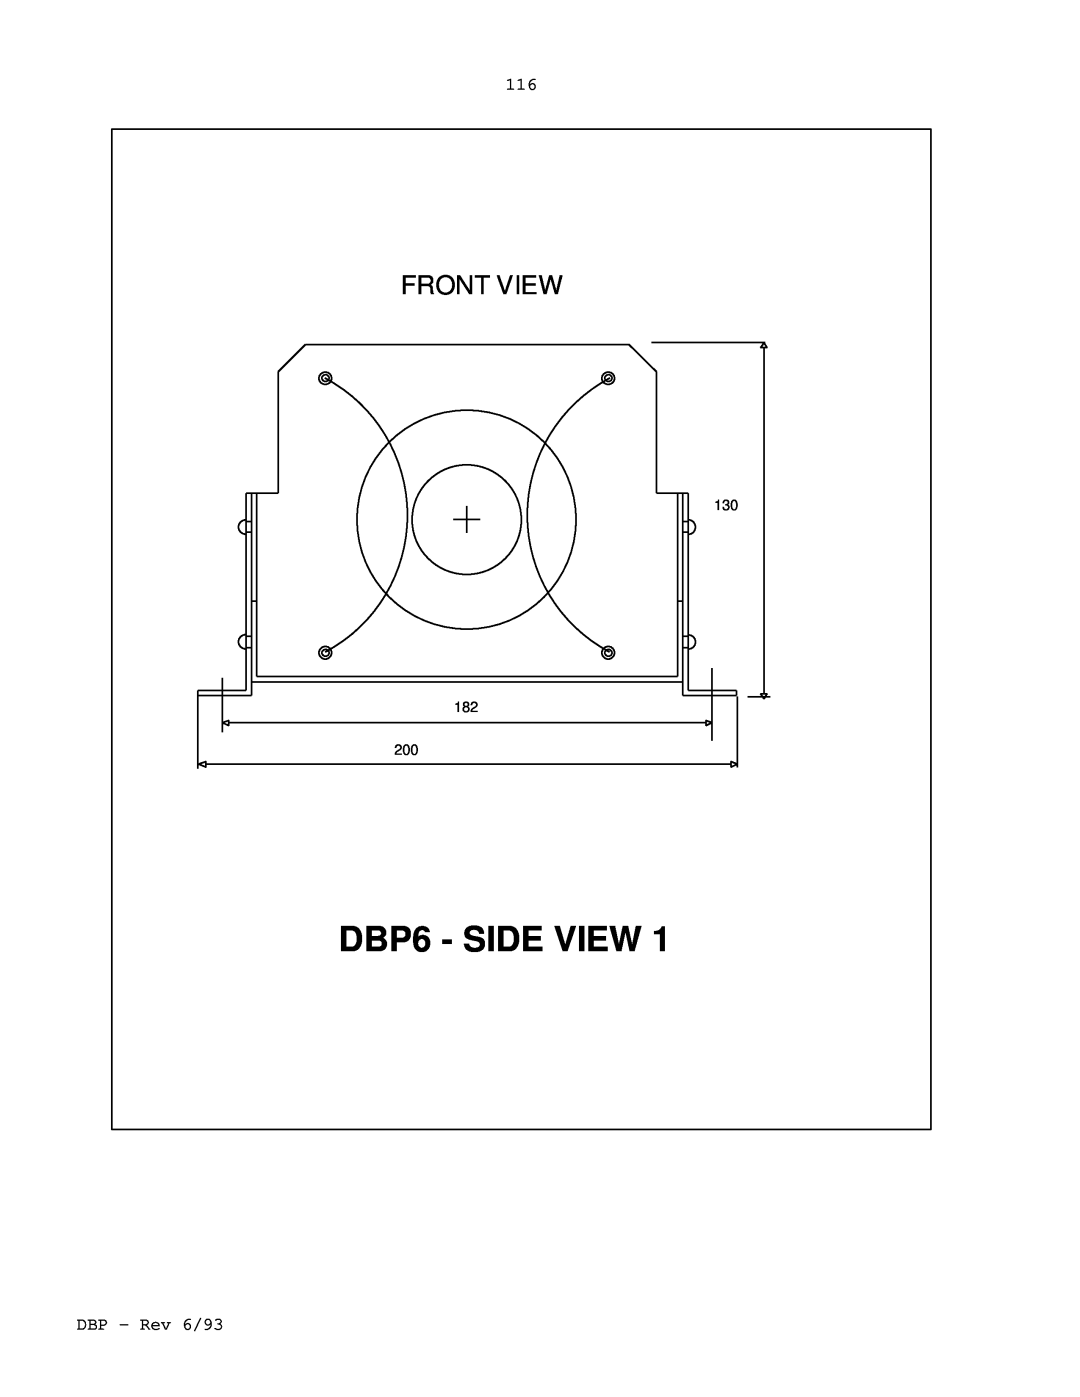 Elmo DBP SERIES manual DBP6 - SIDE VIEW, Front View, 130 